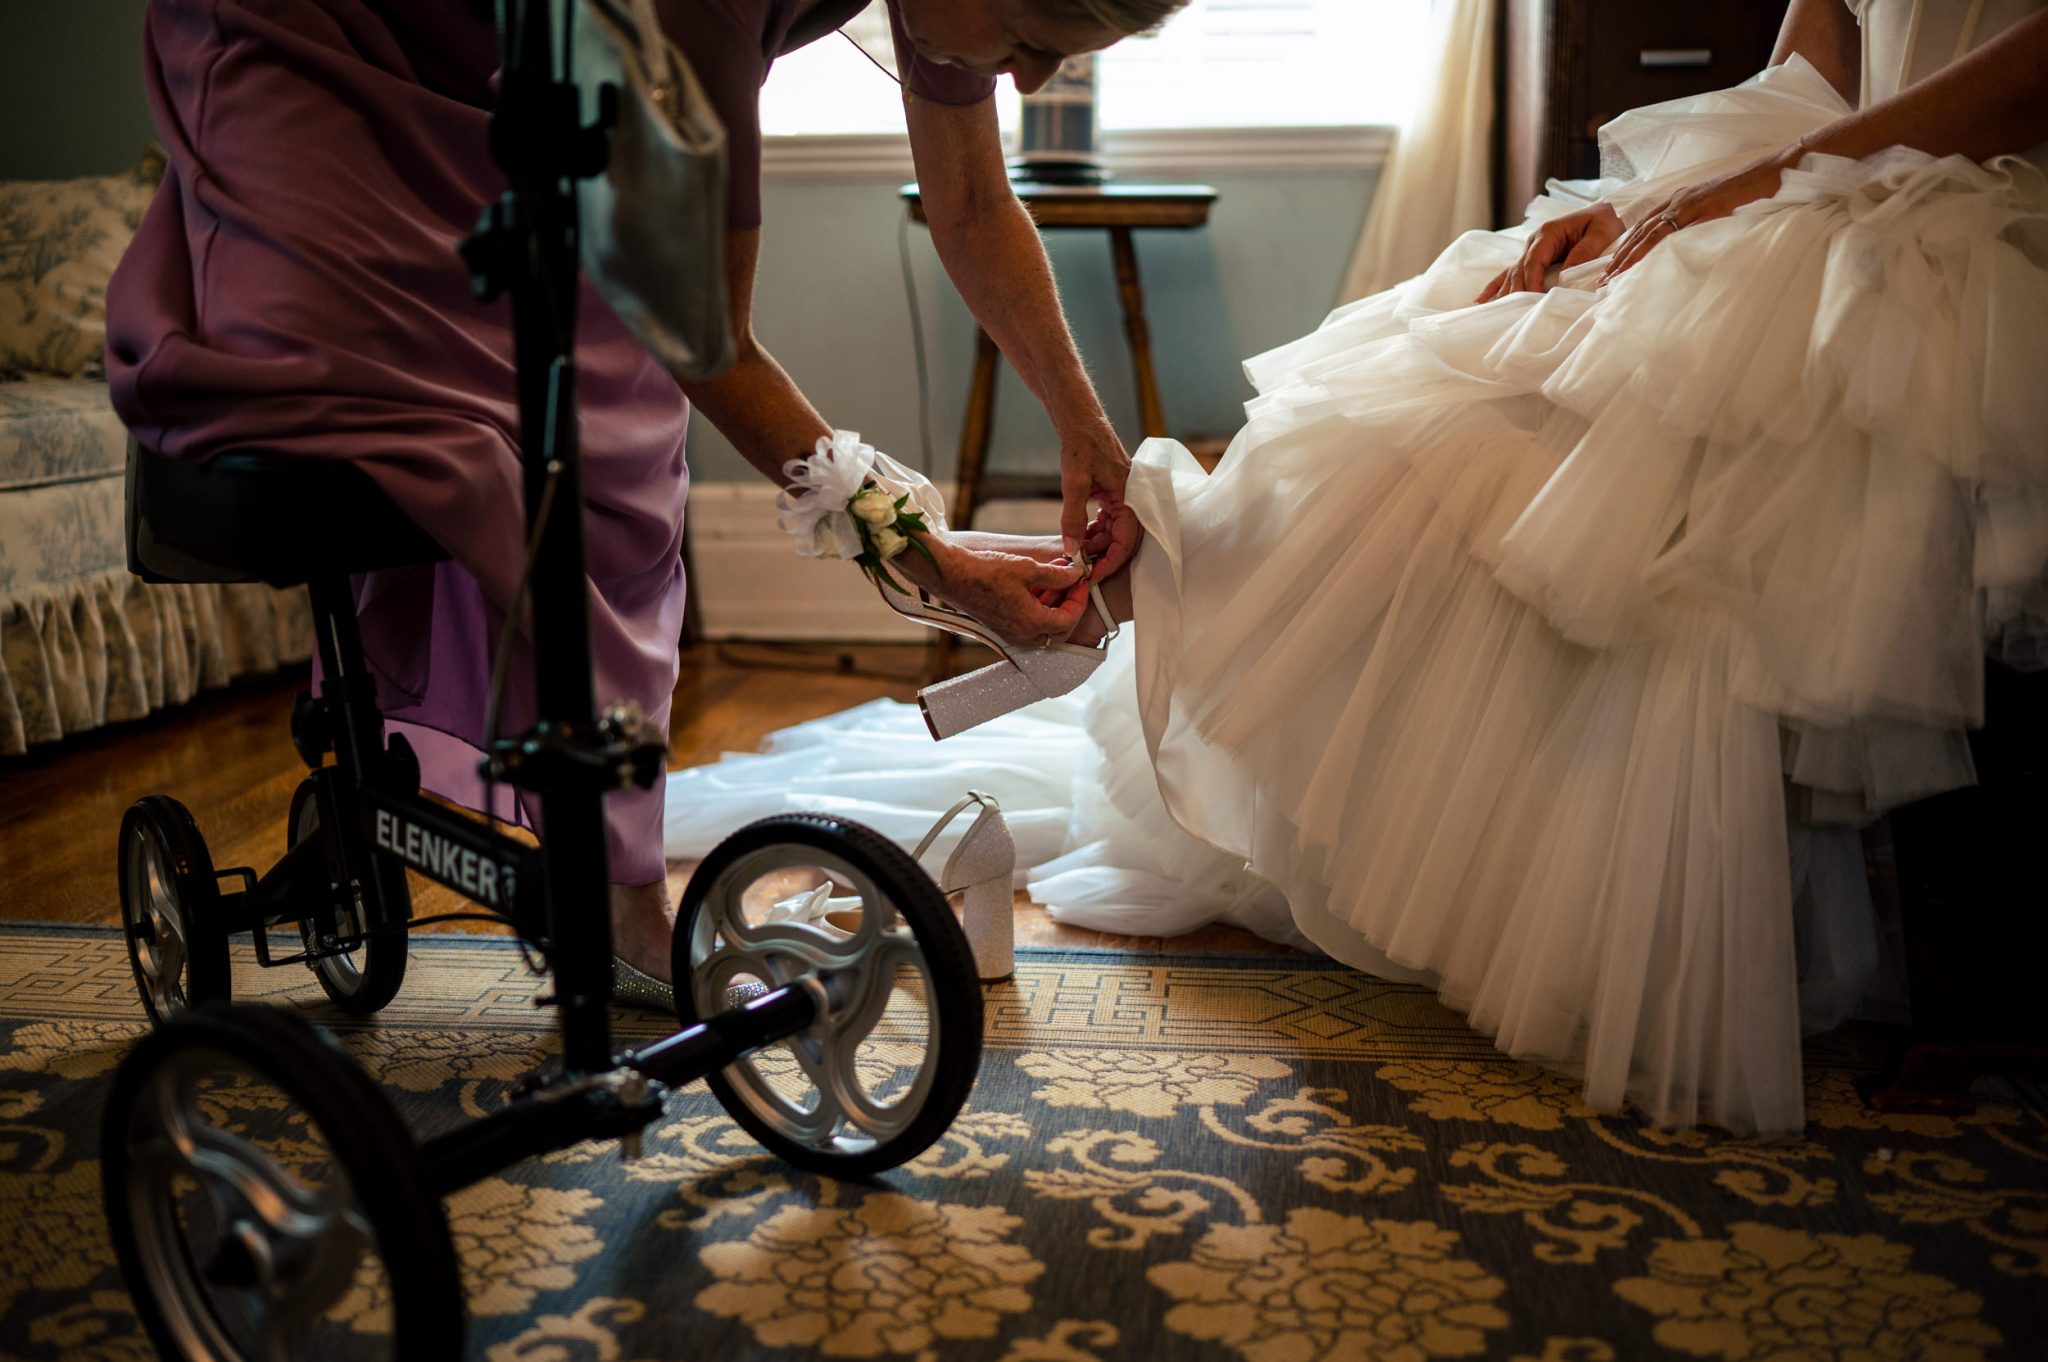 A woman putting on a bride's dress on a wheel chair.